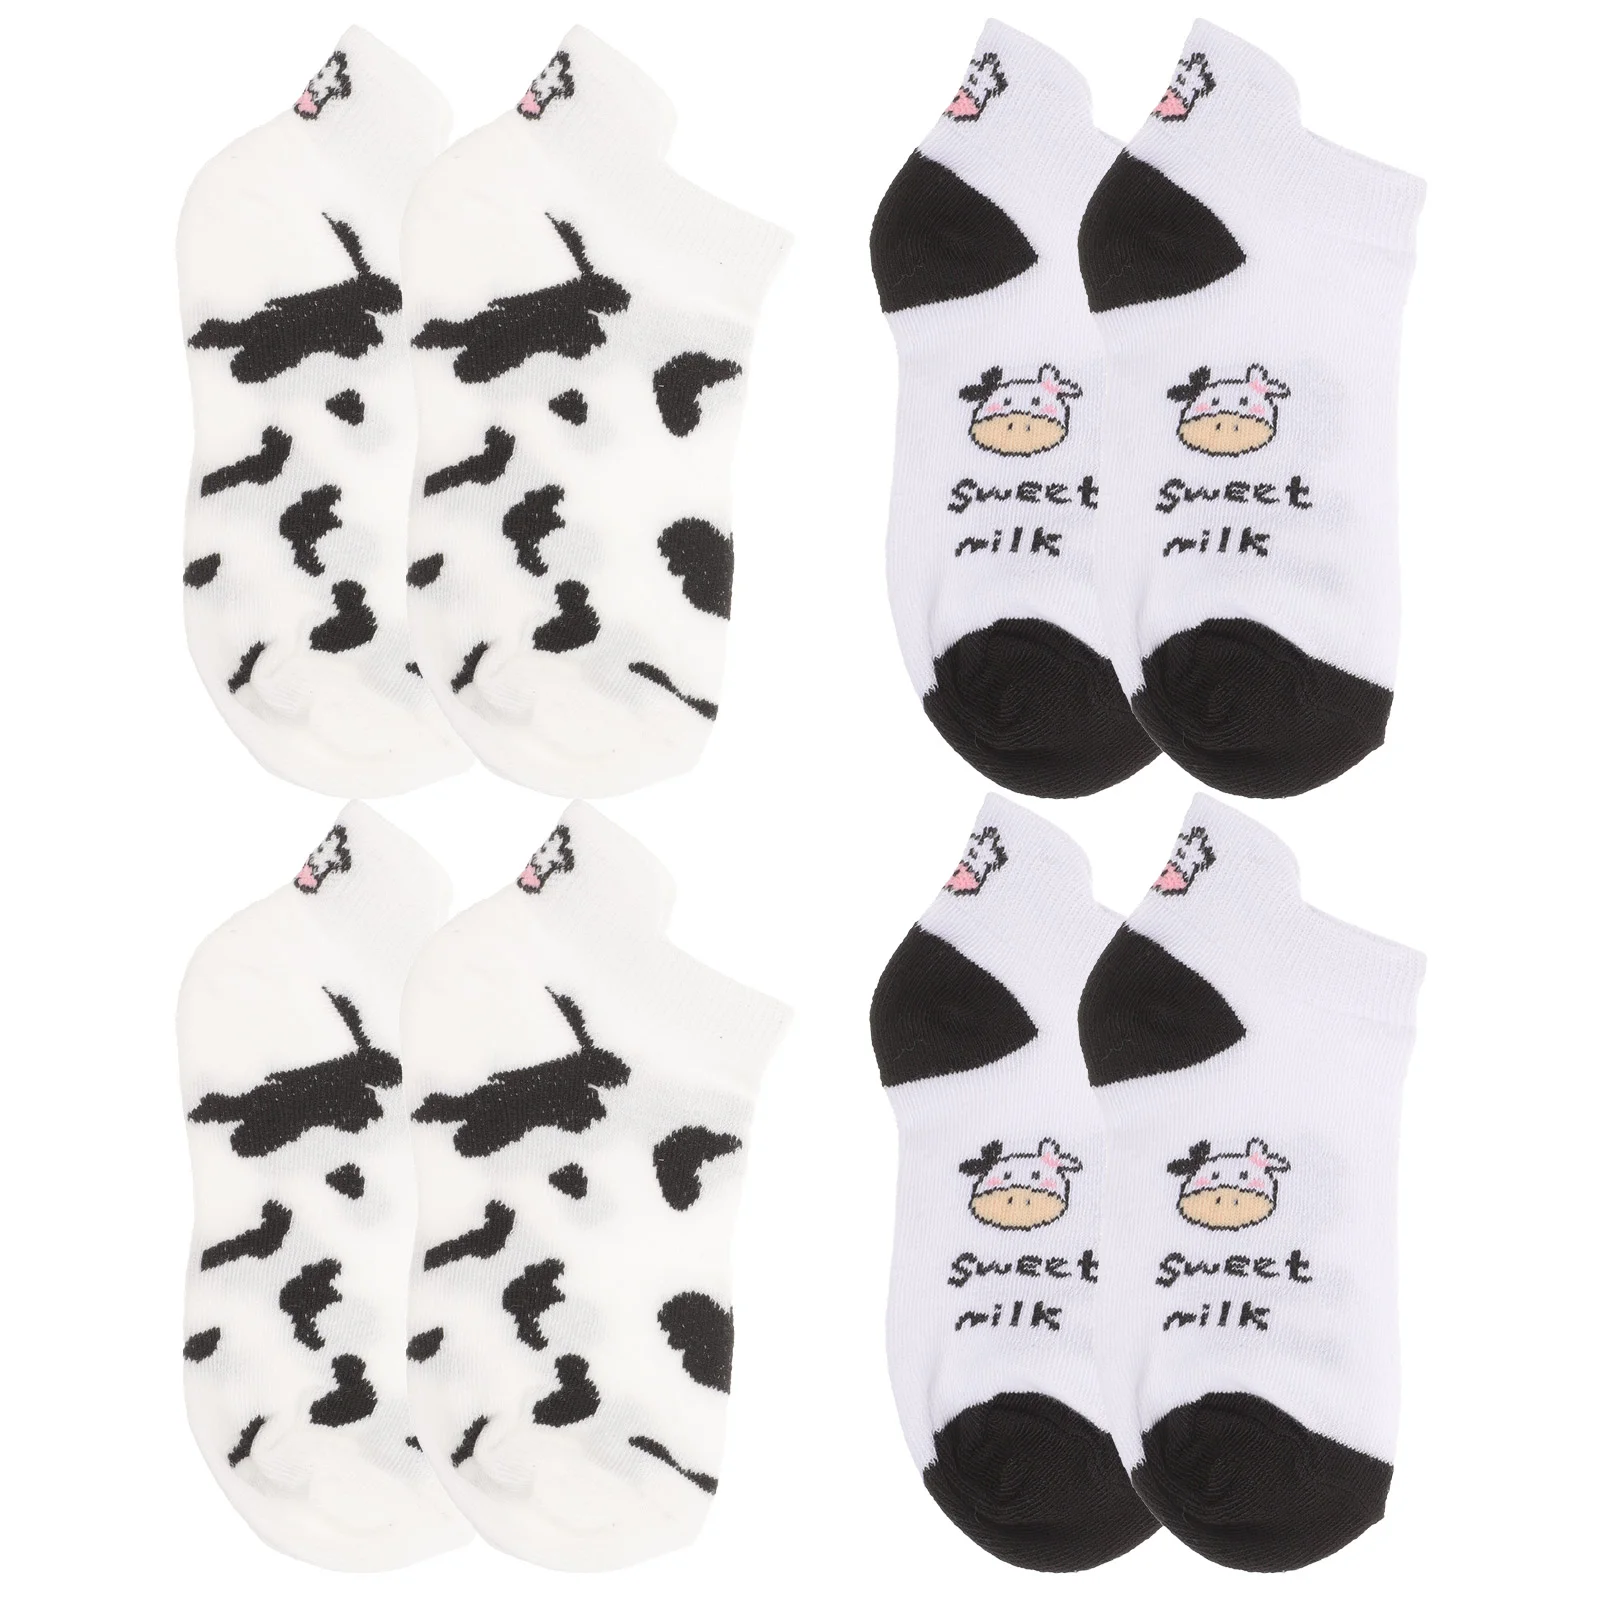 

4 Pairs Cow Socks Adorable Pattern Ankle Ladies Embroidery Short Boat Novelty Fashion Cartoon